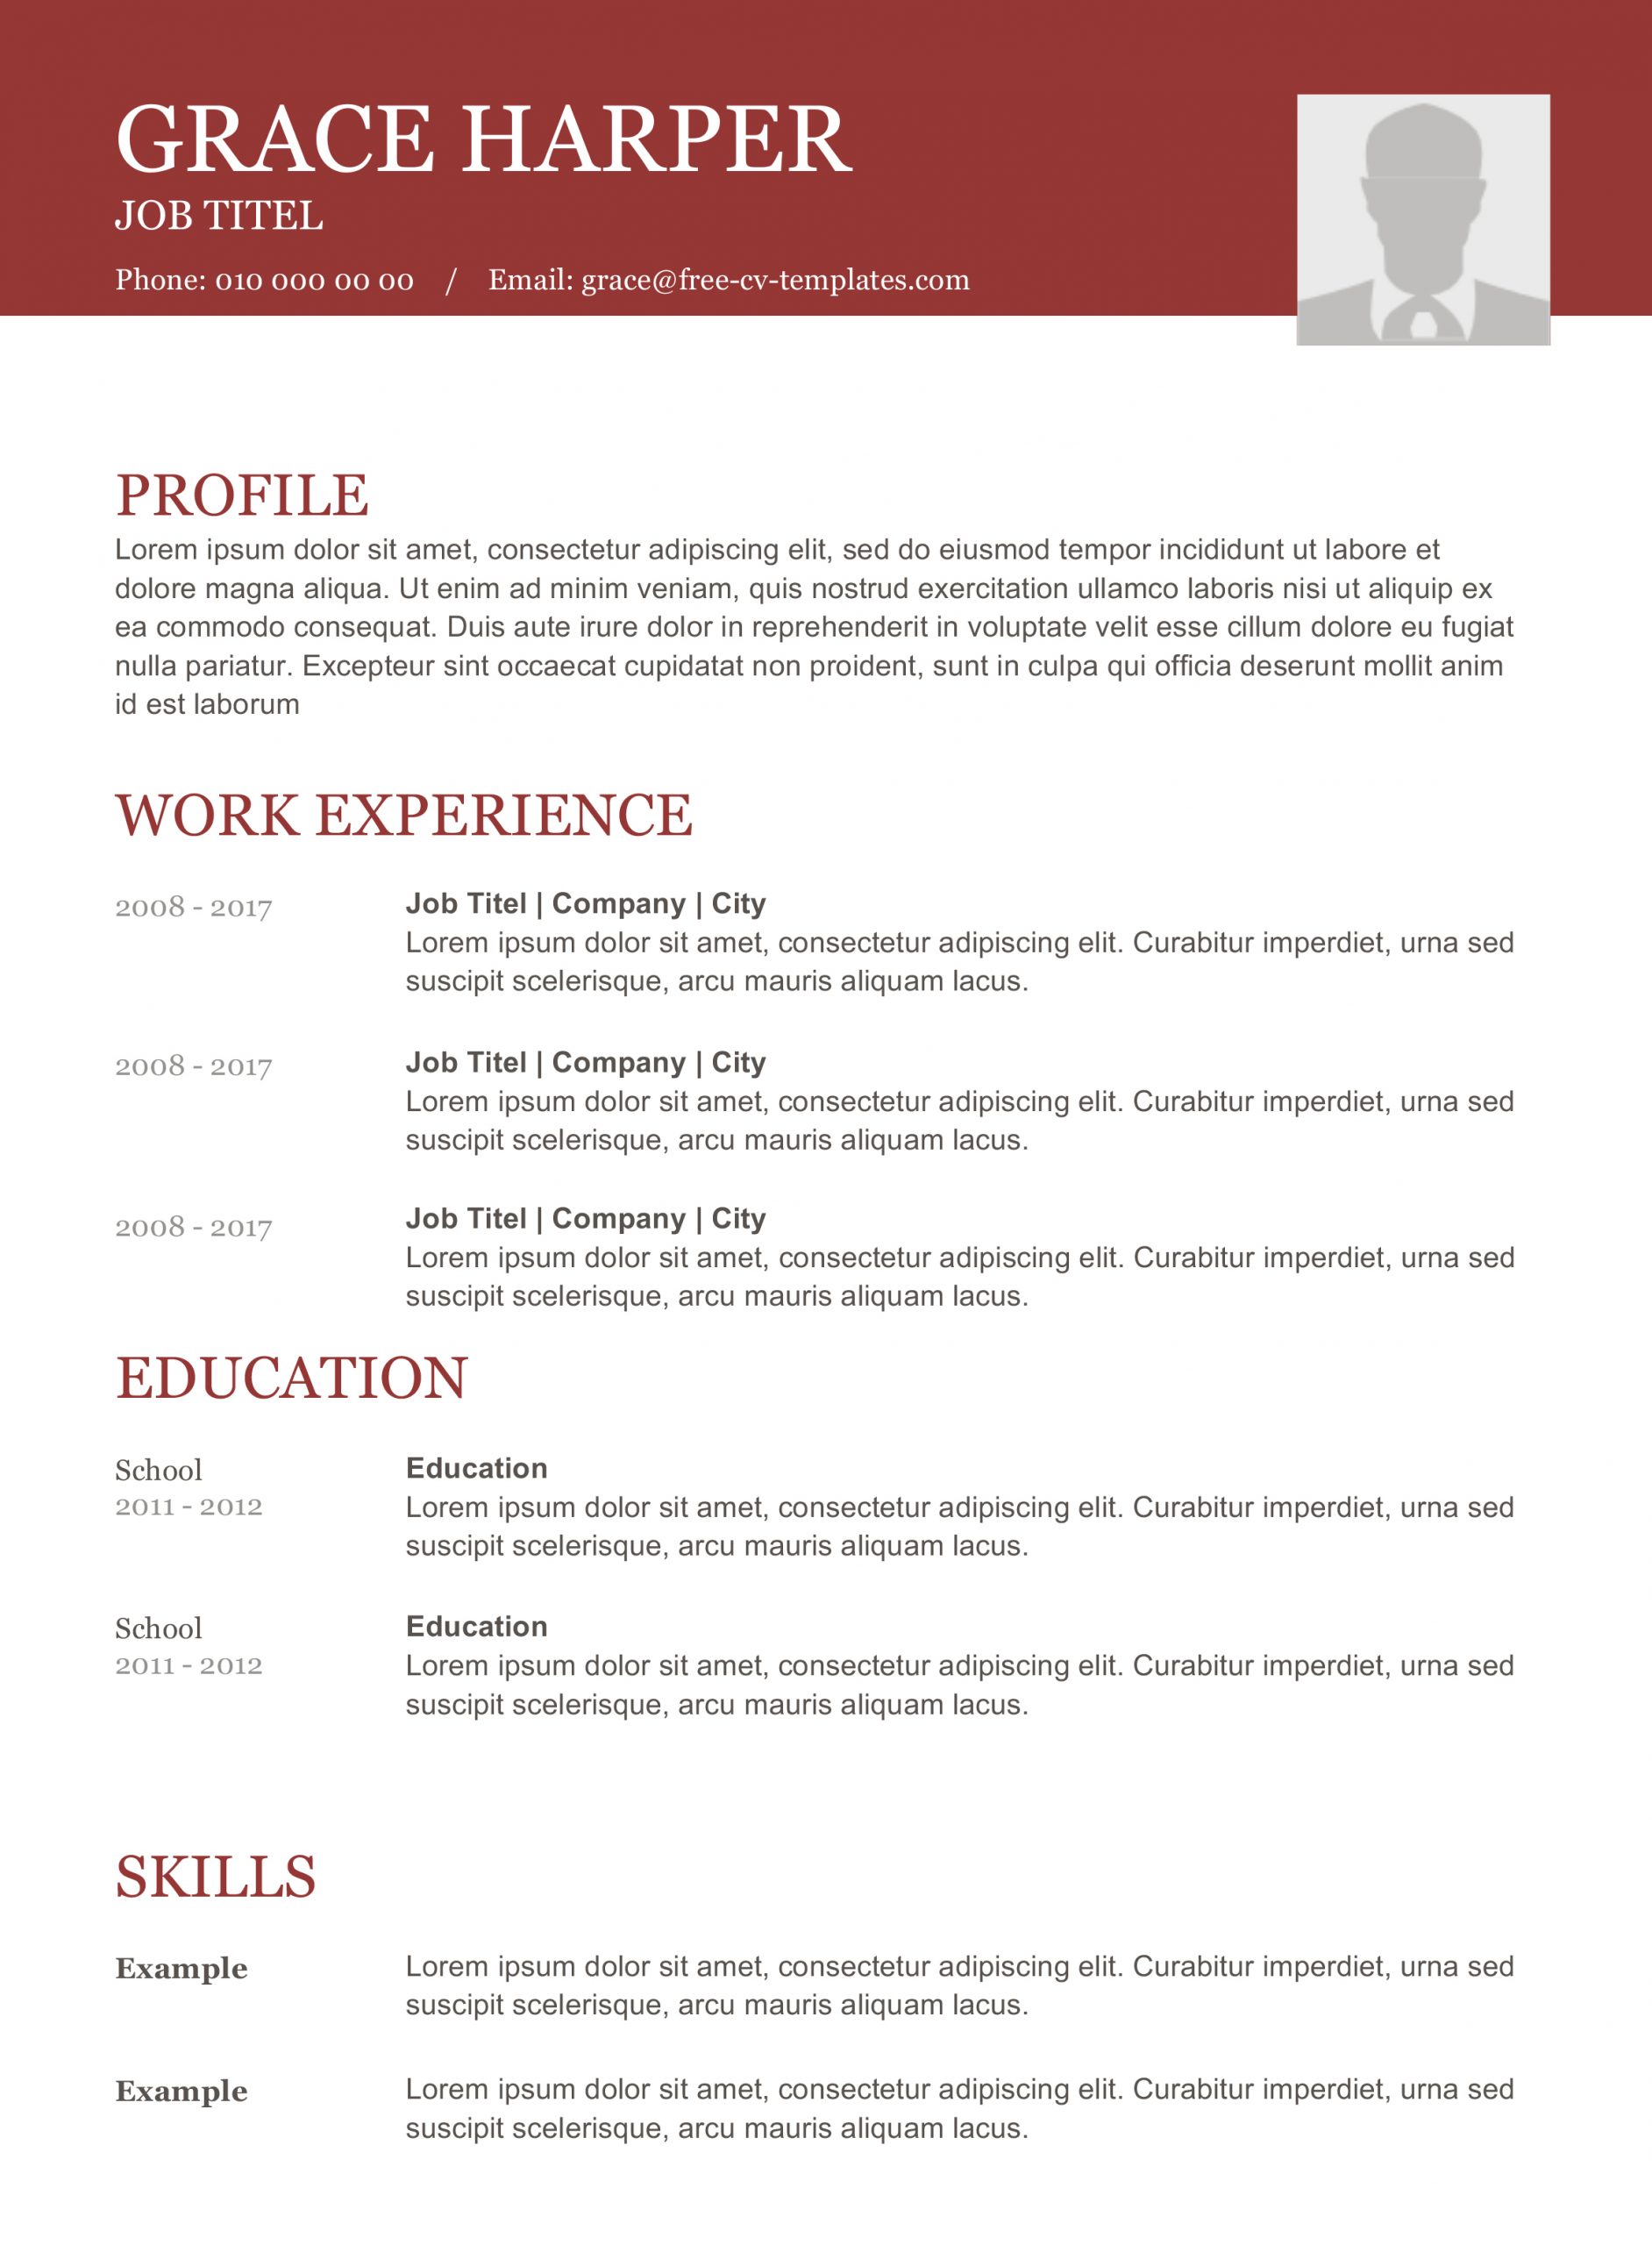 Top Cv Templates We Have Listed The Best 10 Resume Templates throughout proportions 2329 X 3164